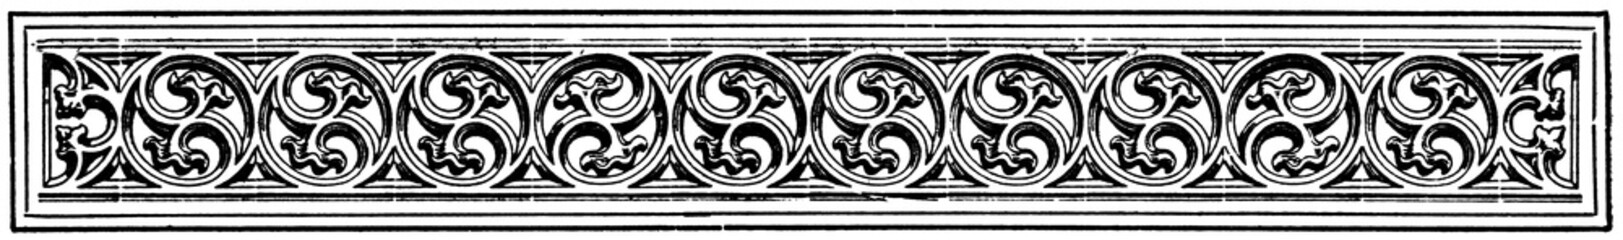 Abstract ornament, chapter separator in a book. Illustration of the 19th century. White background.